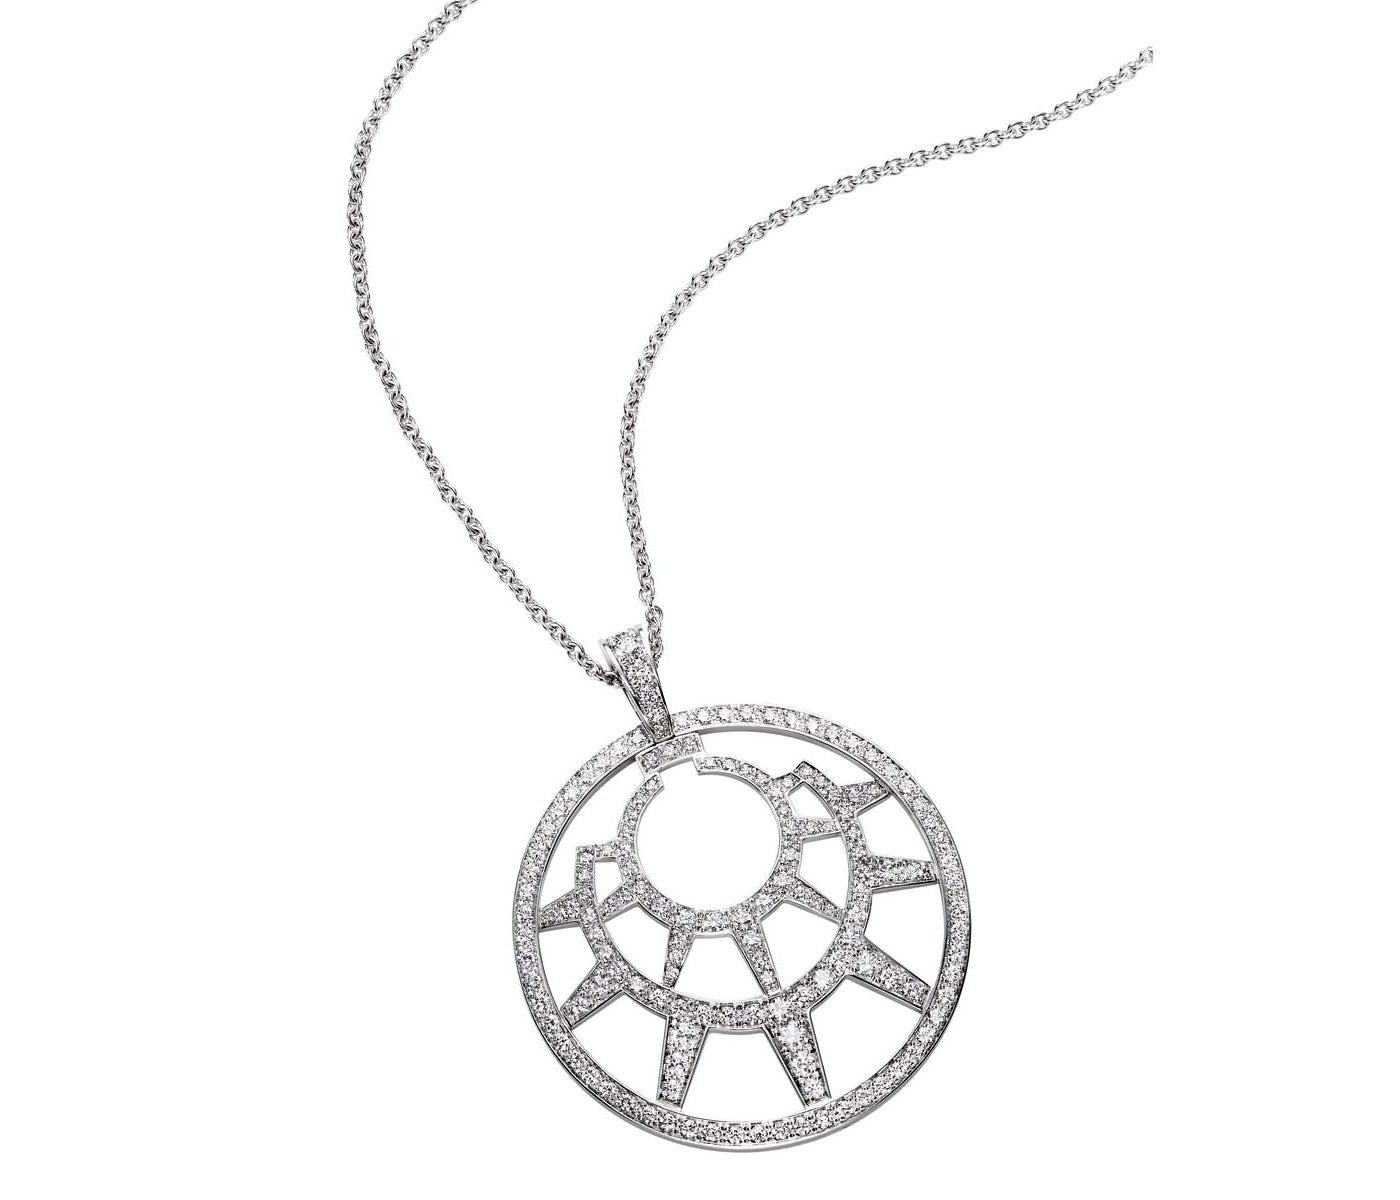 Pendant by Piaget